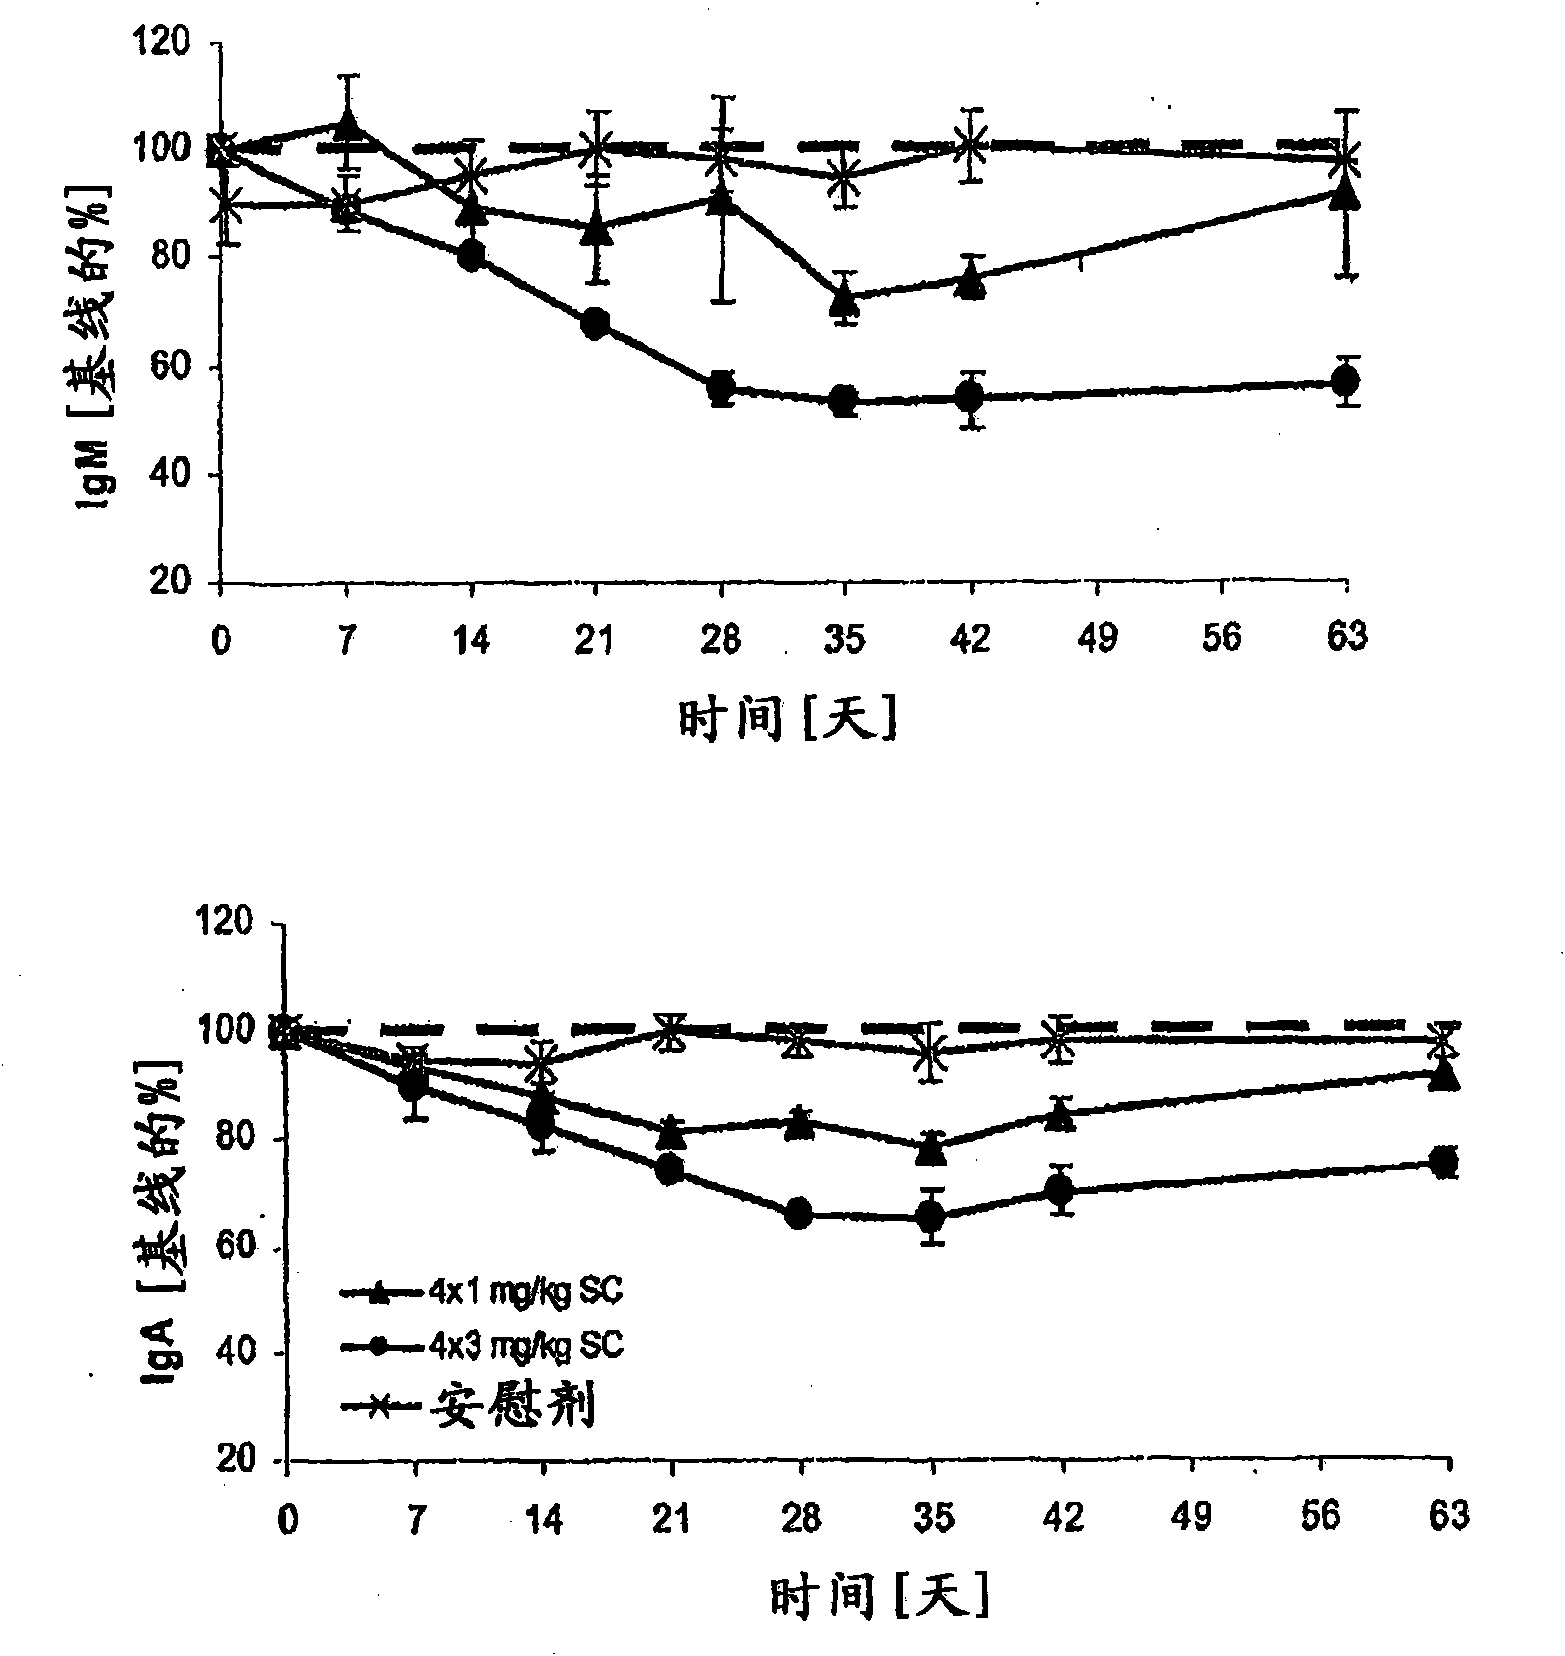 Dosing methods for treating autoimmune diseases using a taci-ig fusion protein such as atacicept